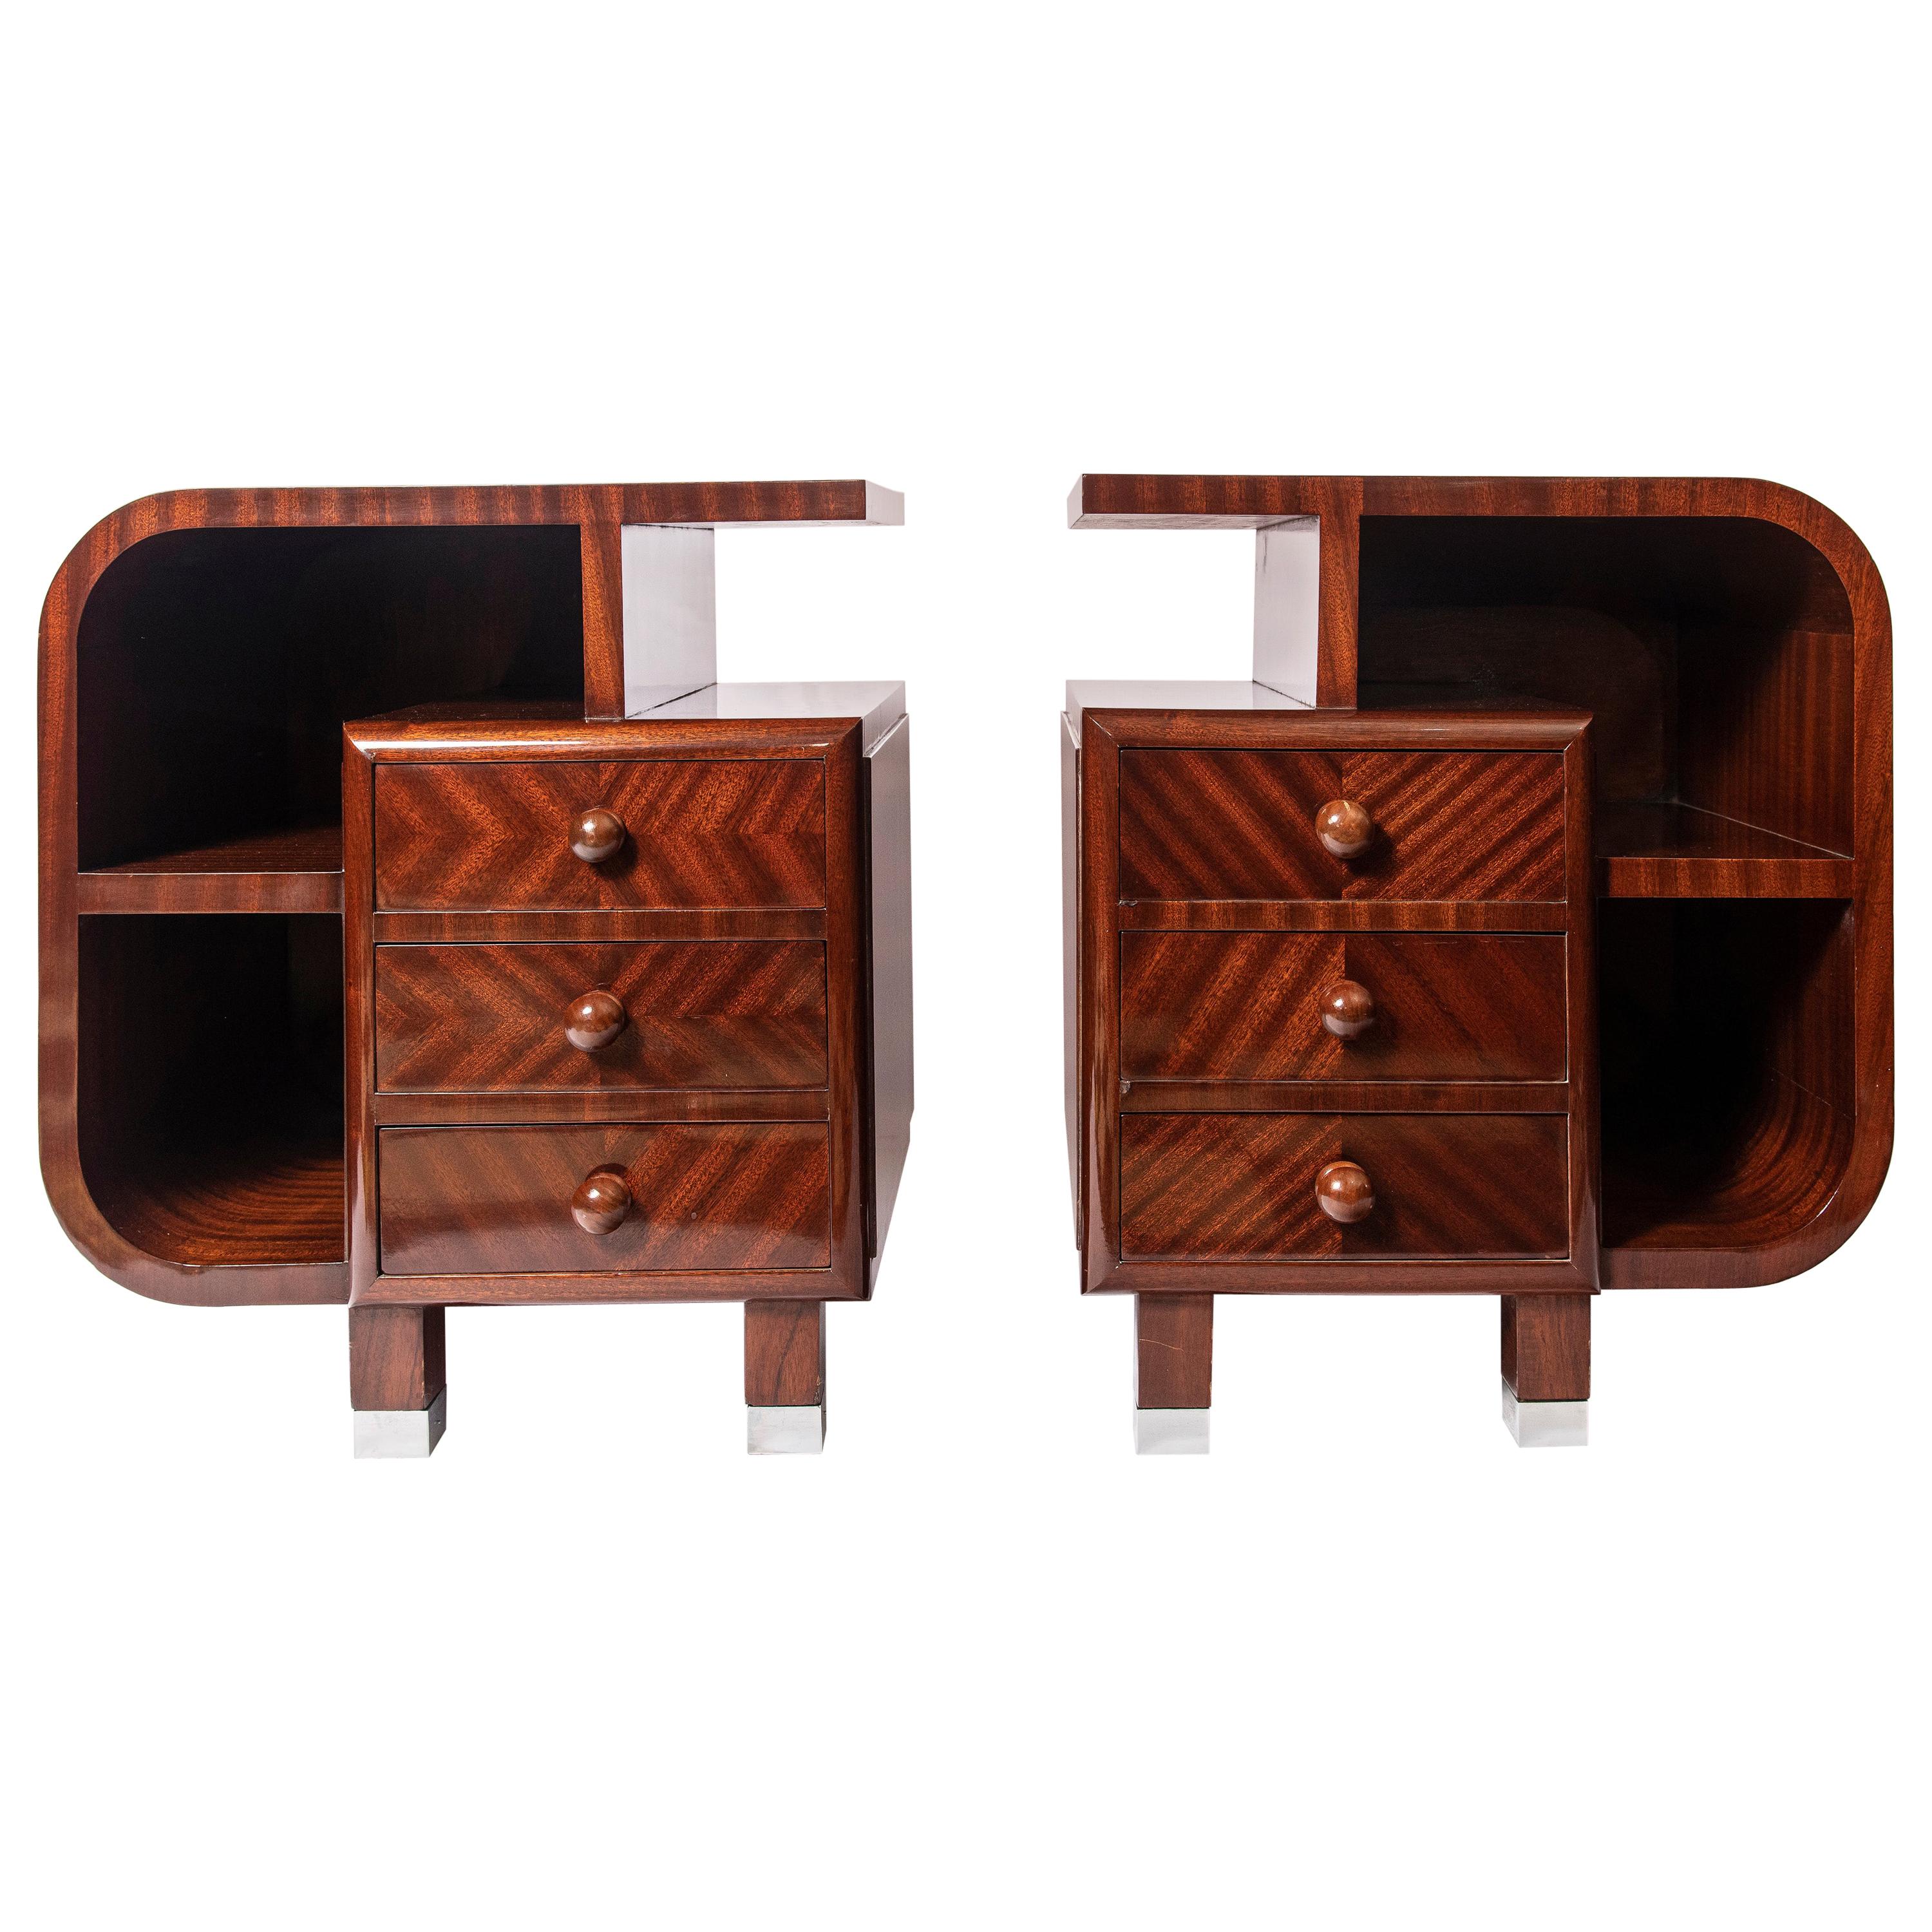 Pair of Wood Nightstands, Art Deco Period, France, circa 1940